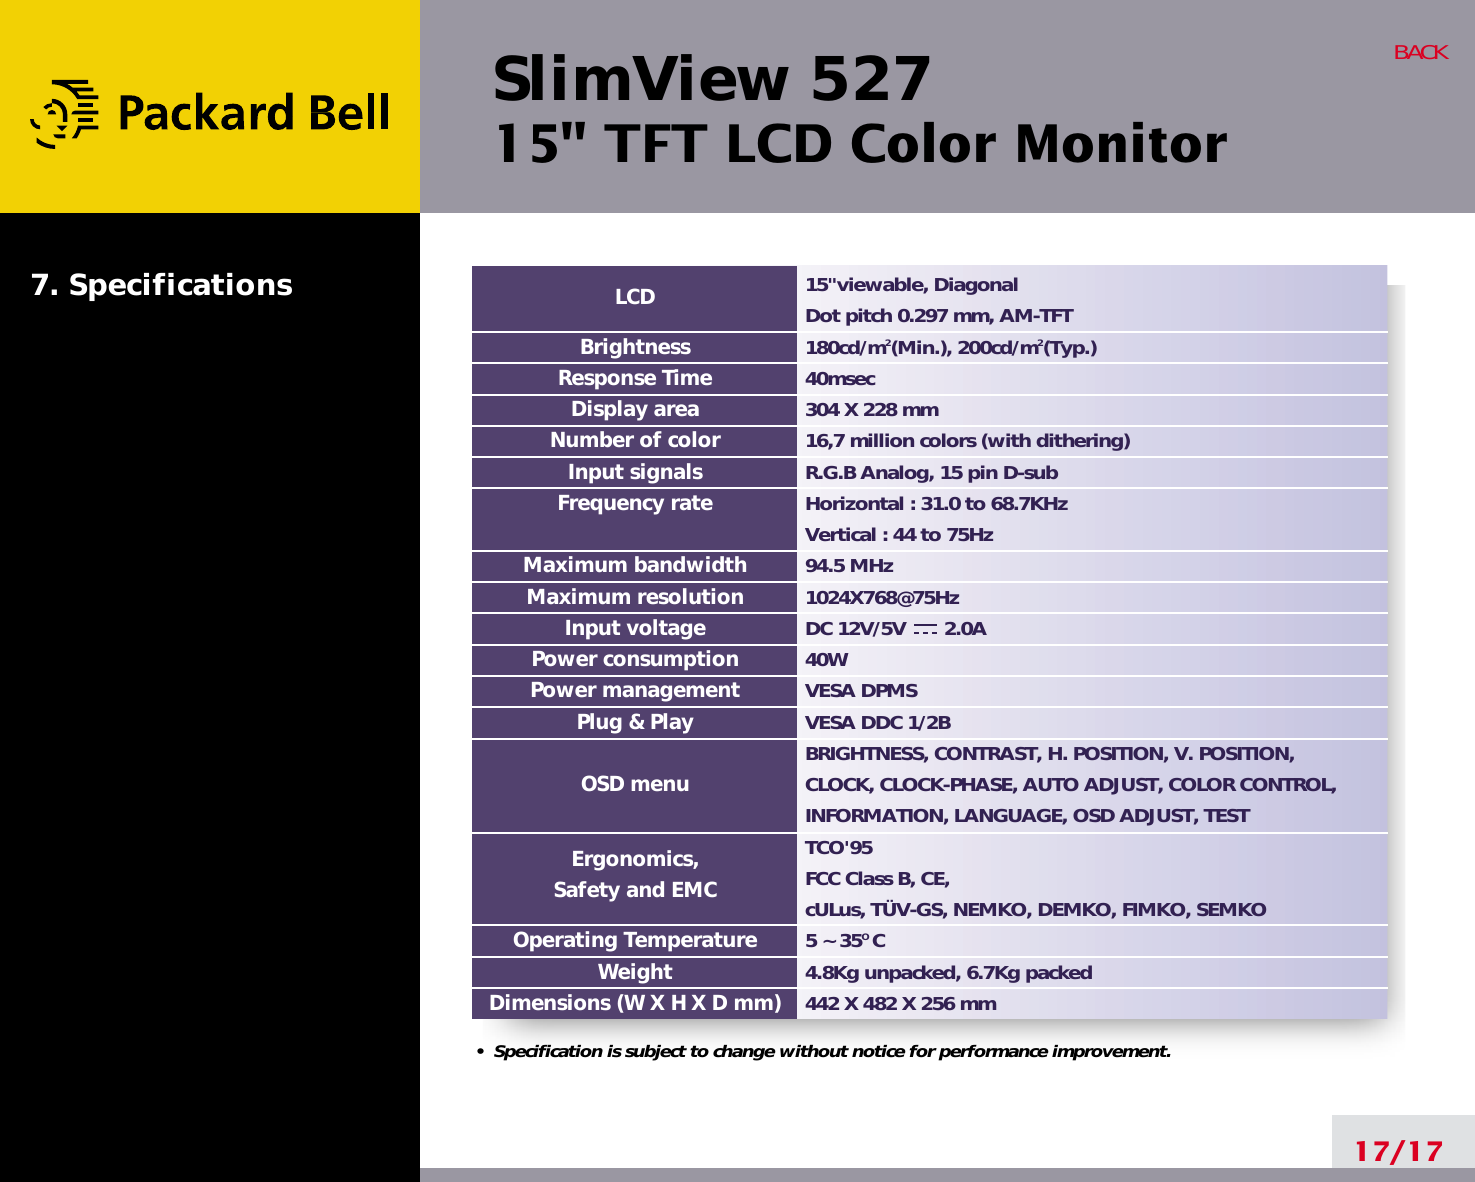 SlimView 52715&quot; TFT LCD Color Monitor17/17BACK15&quot;viewable, DiagonalDot pitch 0.297 mm, AM-TFT 180cd/m2(Min.), 200cd/m2(Typ.)40msec304 X 228 mm16,7 million colors (with dithering)R.G.B Analog, 15 pin D-subHorizontal : 31.0 to 68.7KHzVertical : 44 to 75Hz94.5 MHz1024X768@75HzDC 12V/5V       2.0A 40WVESA DPMSVESA DDC 1/2BBRIGHTNESS, CONTRAST, H. POSITION, V. POSITION, CLOCK, CLOCK-PHASE, AUTO ADJUST, COLOR CONTROL,INFORMATION, LANGUAGE, OSD ADJUST, TESTTCO&apos;95FCC Class B, CE,cULus, TÜV-GS, NEMKO, DEMKO, FIMKO, SEMKO5 ~ 35O C4.8Kg unpacked, 6.7Kg packed442 X 482 X 256 mmLCDBrightnessResponse TimeDisplay areaNumber of colorInput signalsFrequency rateMaximum bandwidthMaximum resolutionInput voltagePower consumptionPower managementPlug &amp; PlayOSD menuErgonomics,Safety and EMCOperating TemperatureWeightDimensions (W X H X D mm)•  Specification is subject to change without notice for performance improvement.7. Specifications